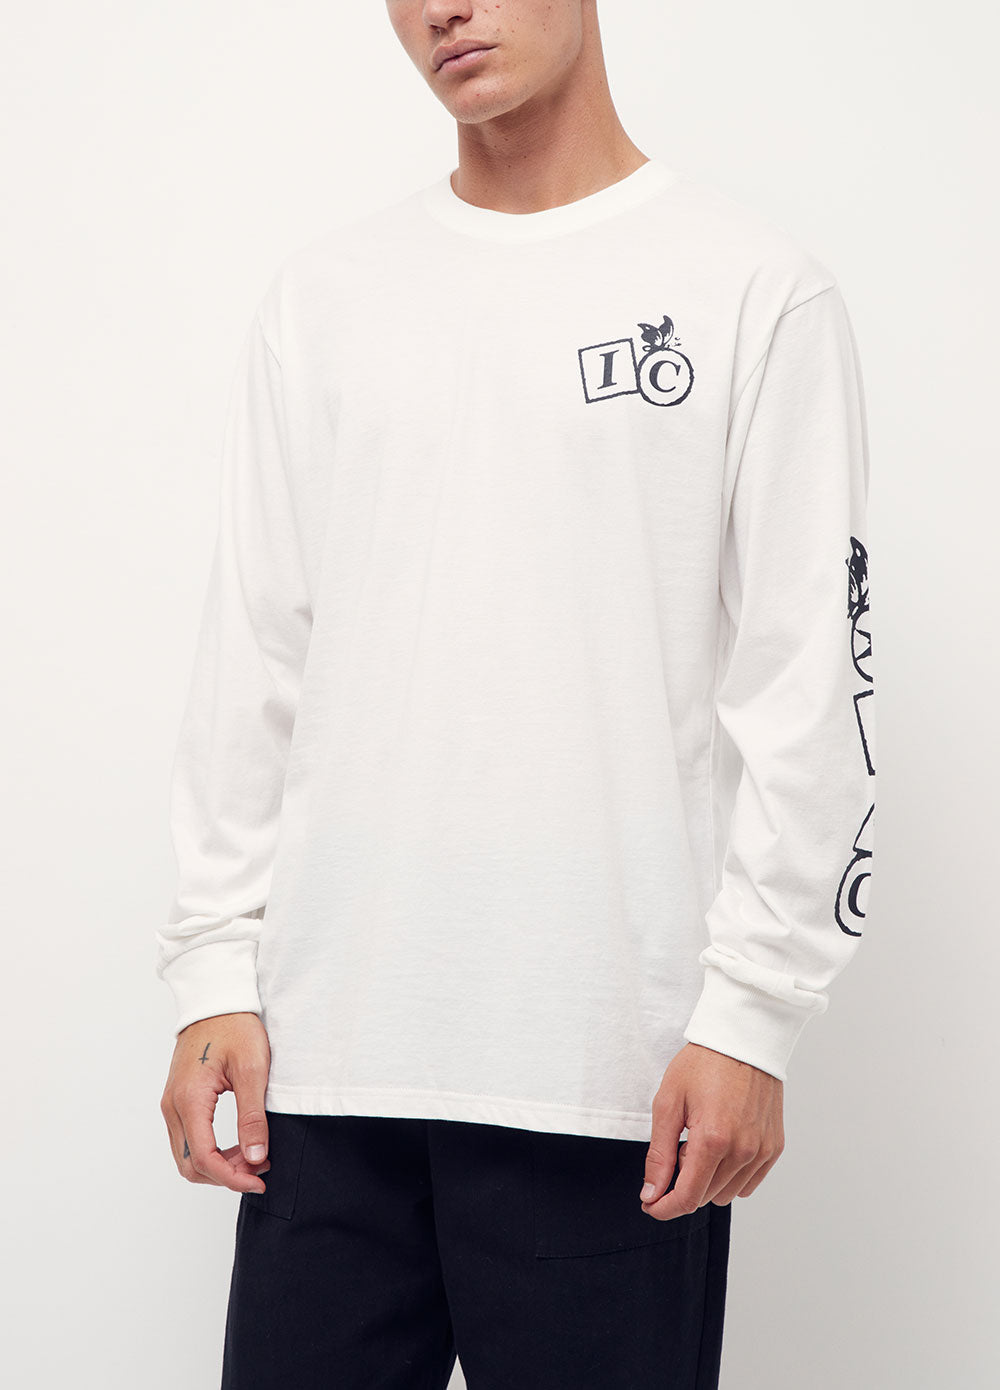 Men's White Social Harmony Long-sleeve T-shirt by Incu Collection | Incu